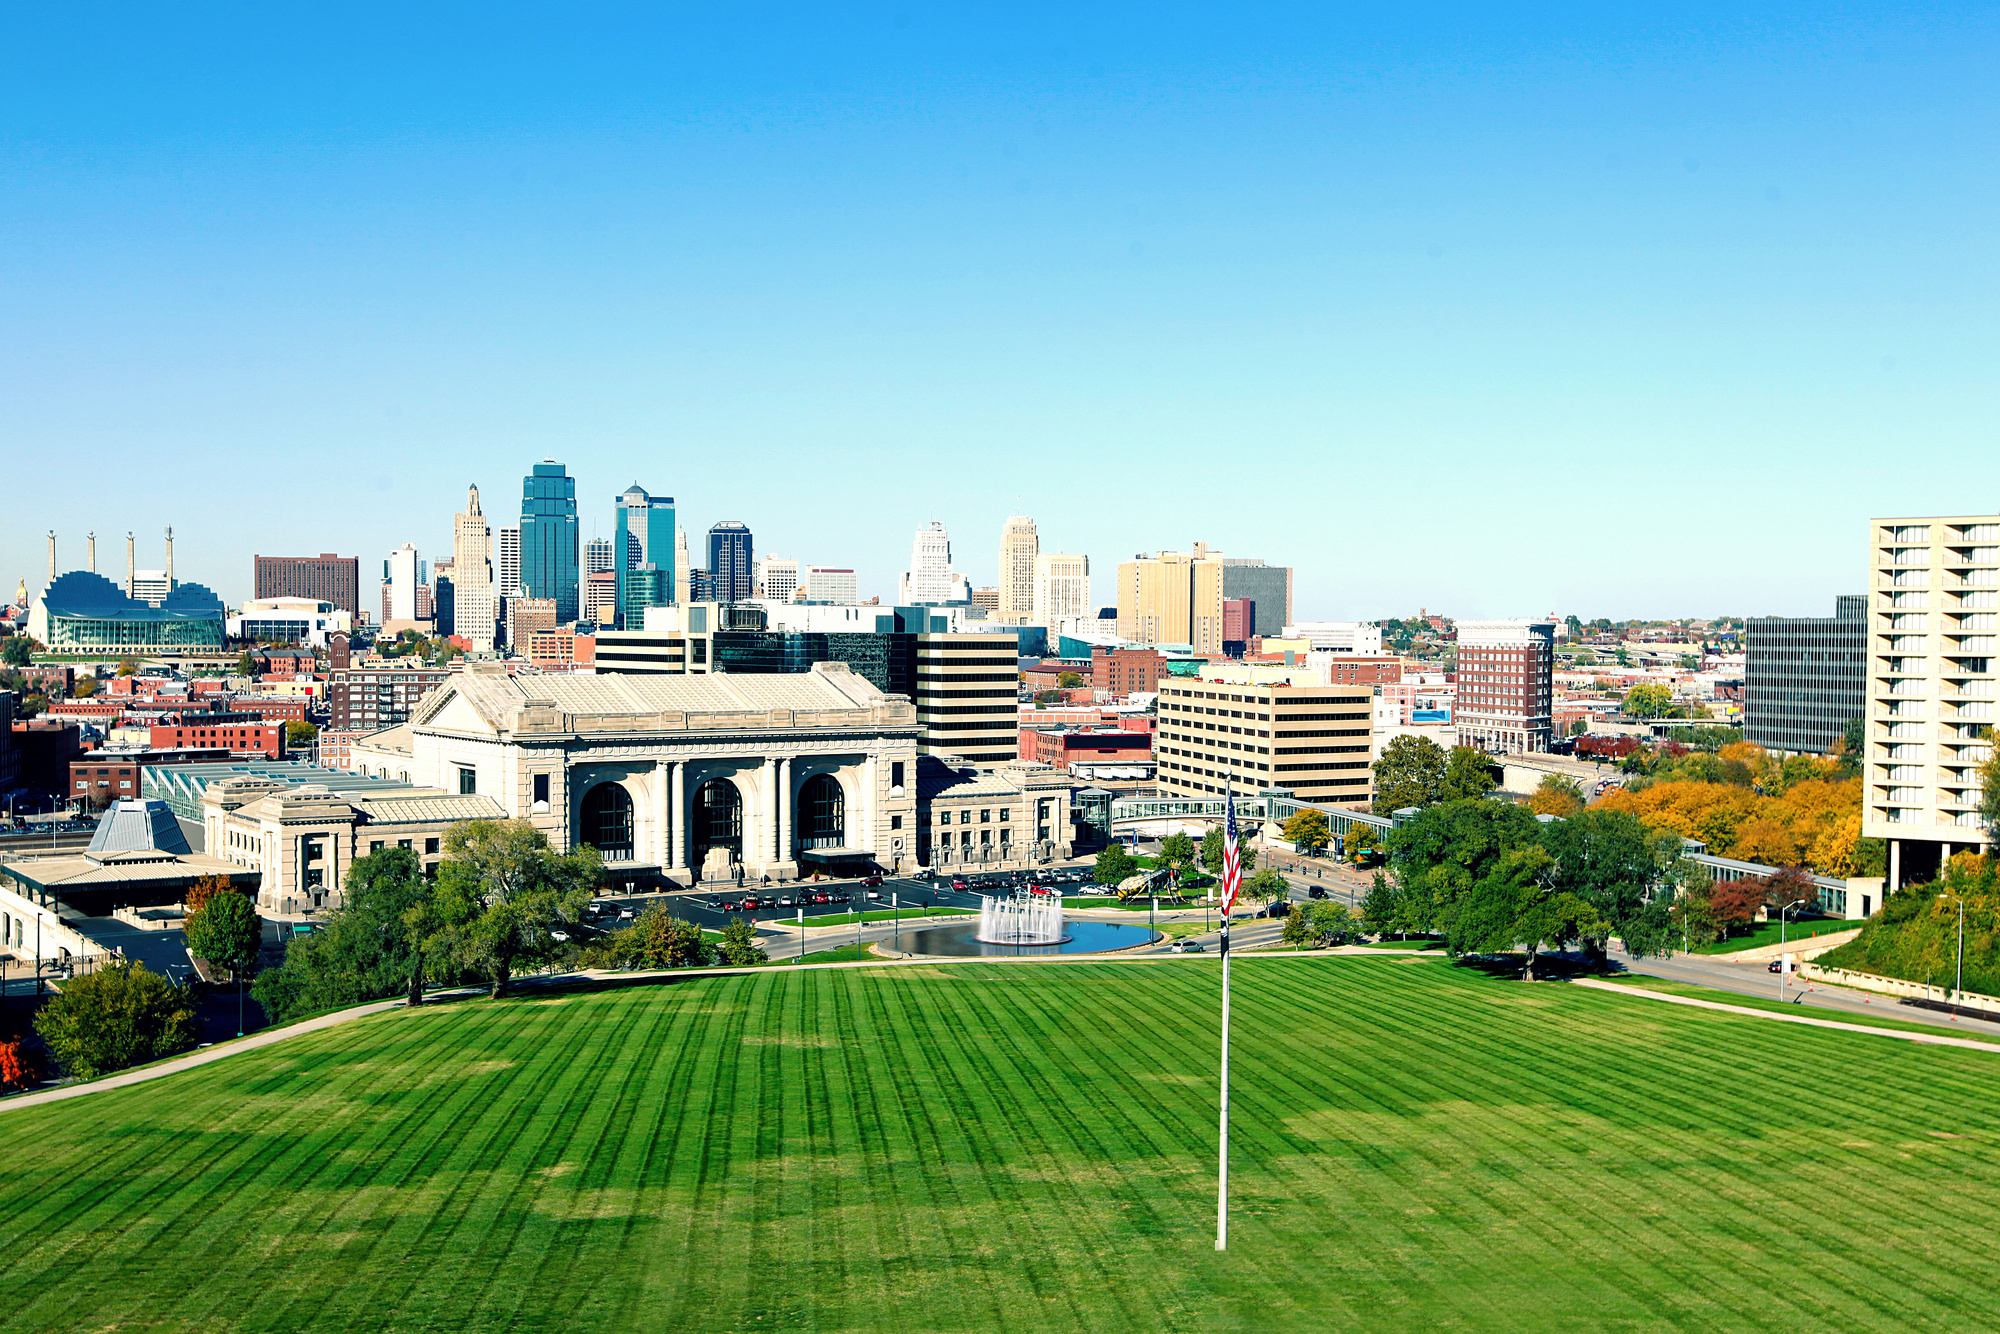 a view of the Kansas City skyline from the top of a hill